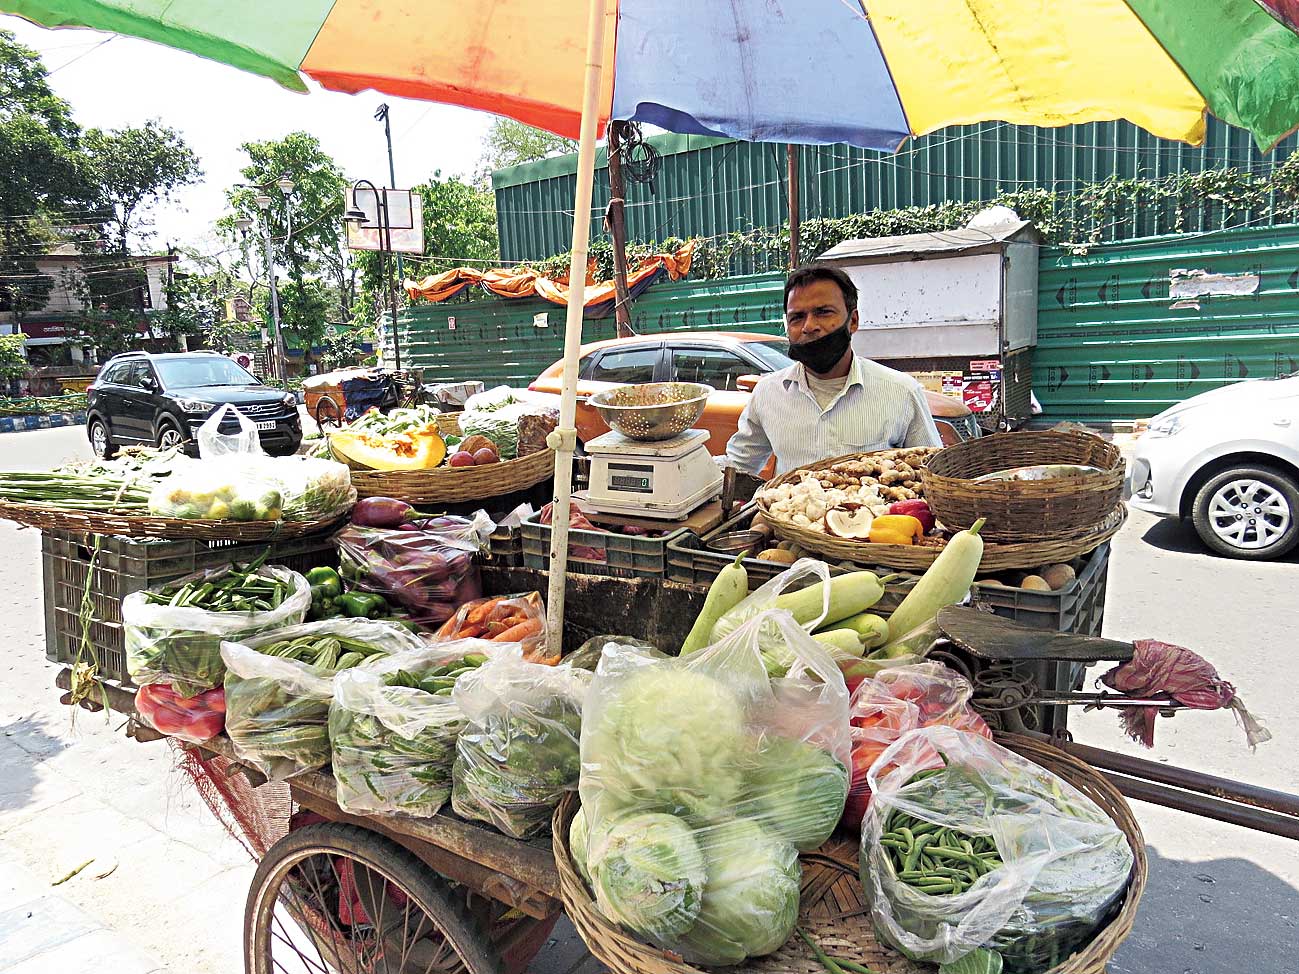 Madhab Malo with his vegetable cart in HB Block